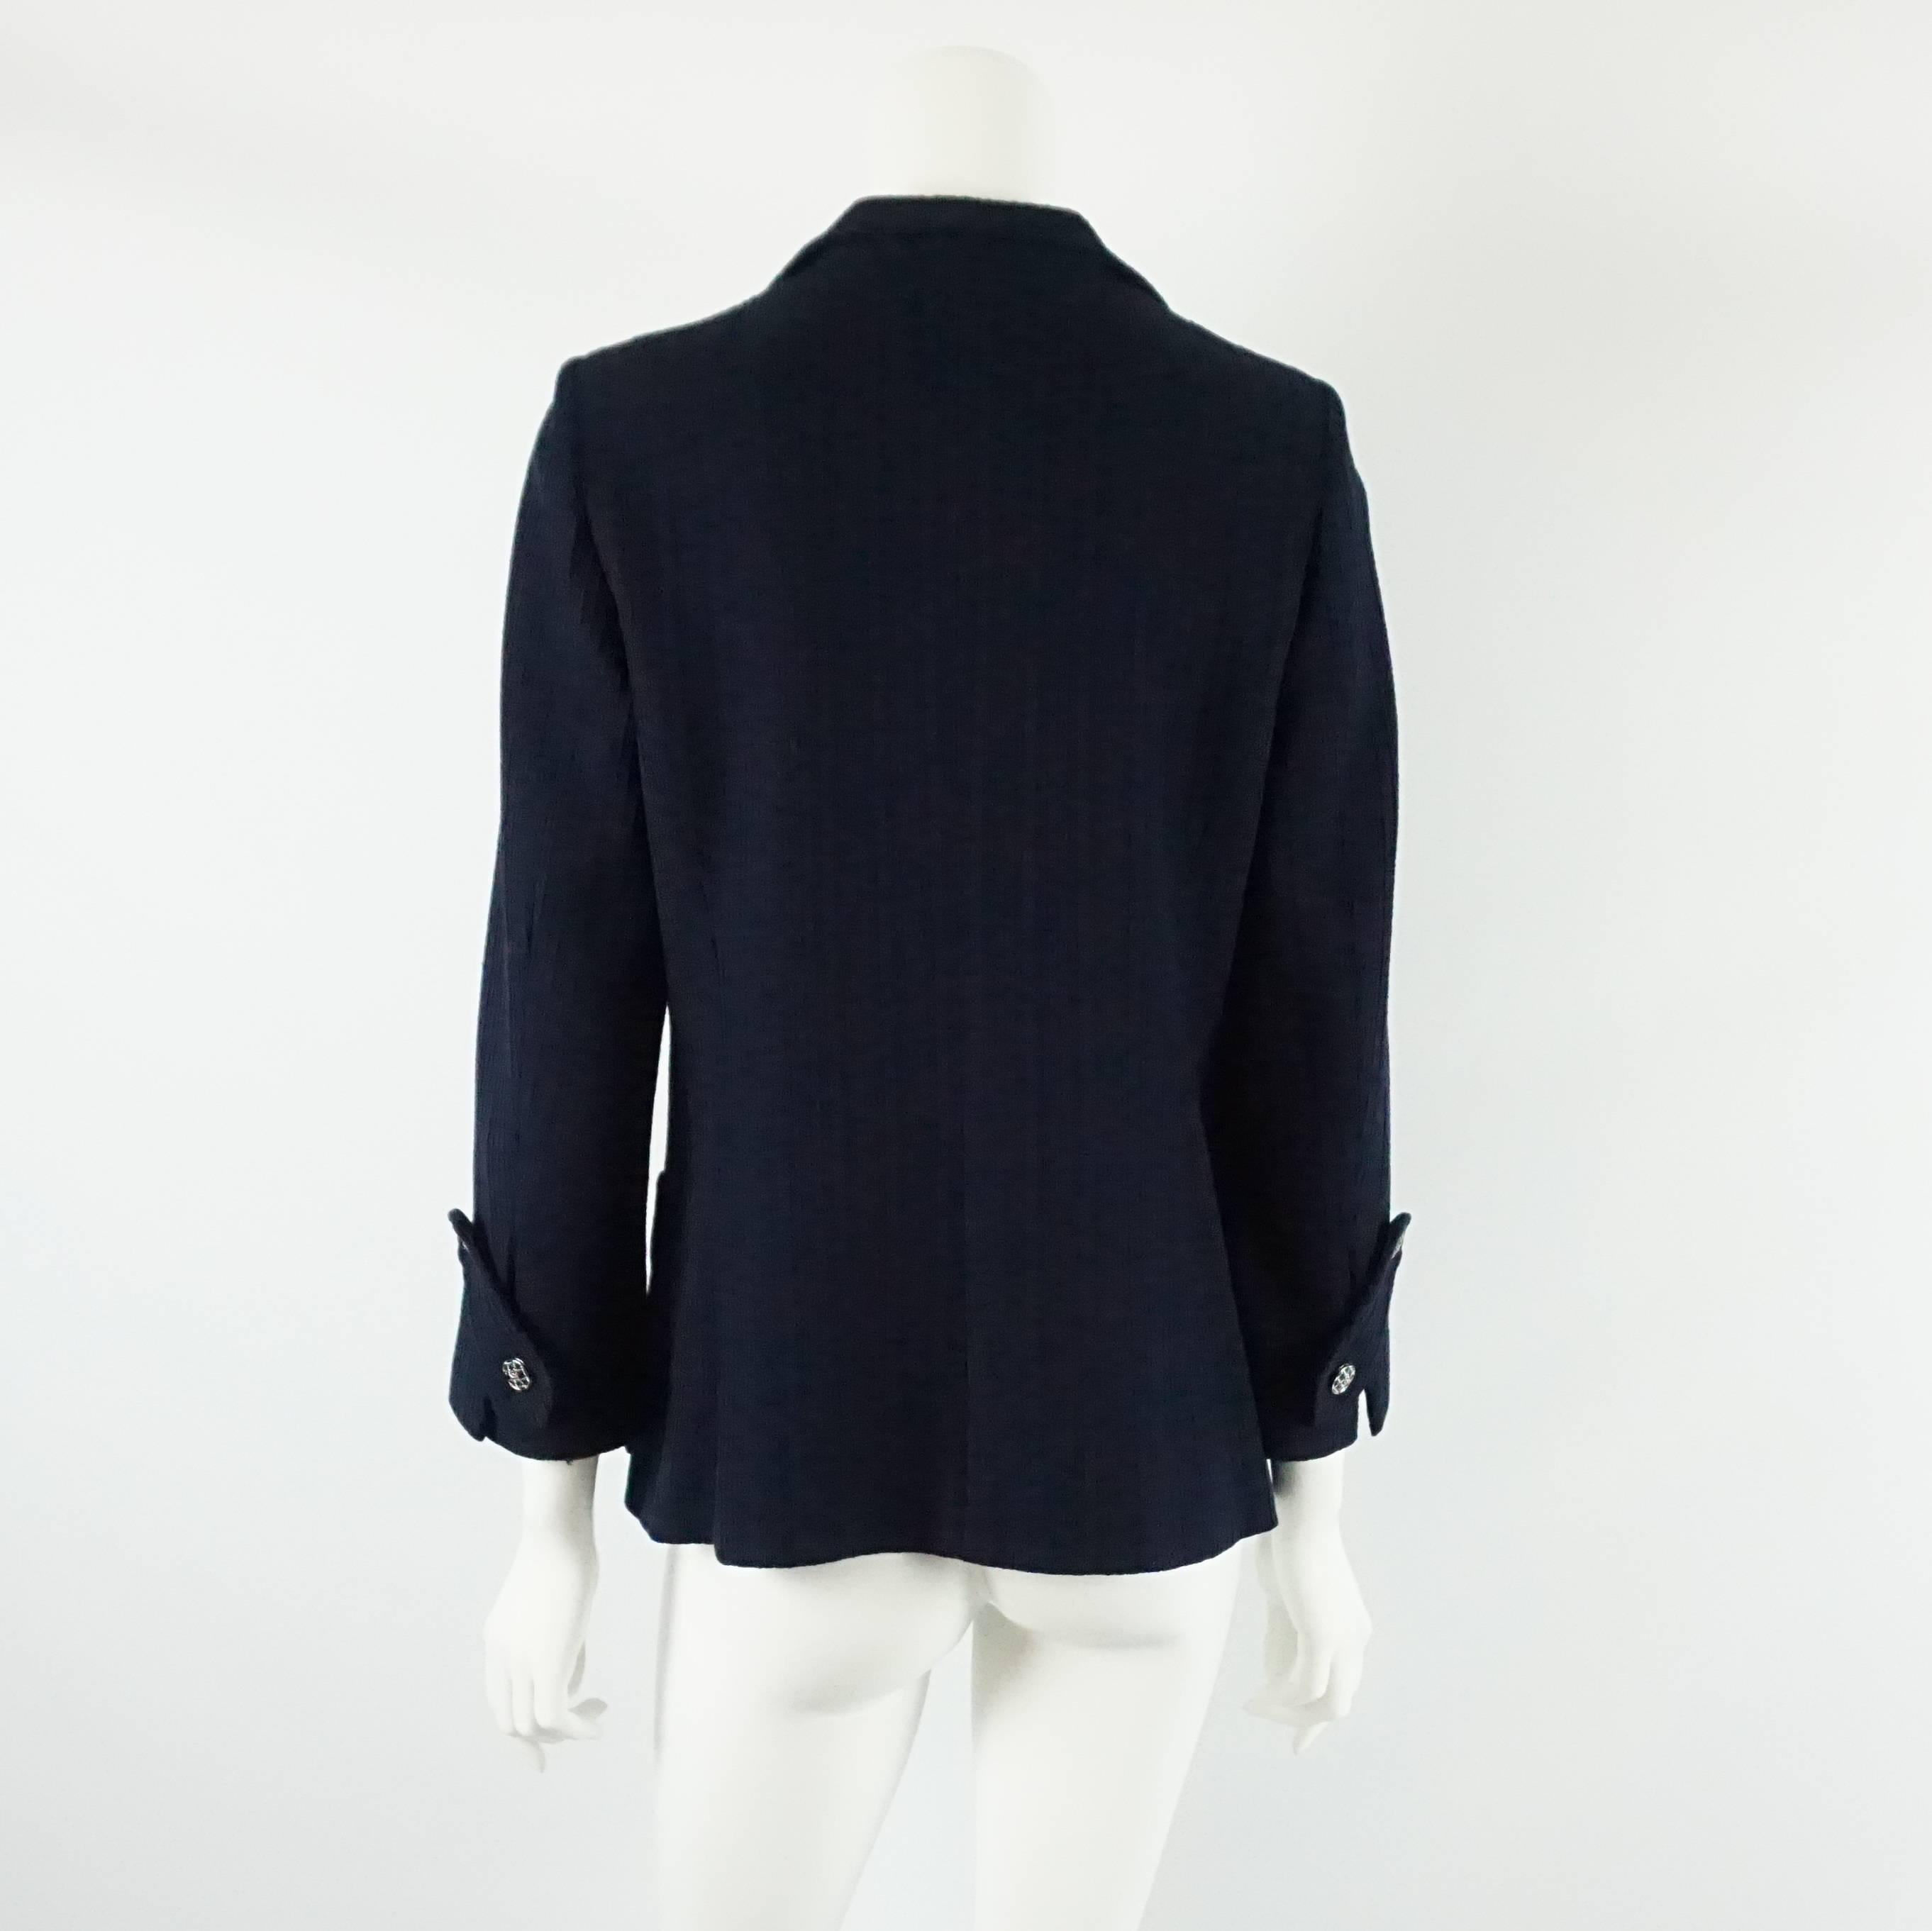 Black Chanel Navy Cotton Jacket with Enamel Buttons - 42